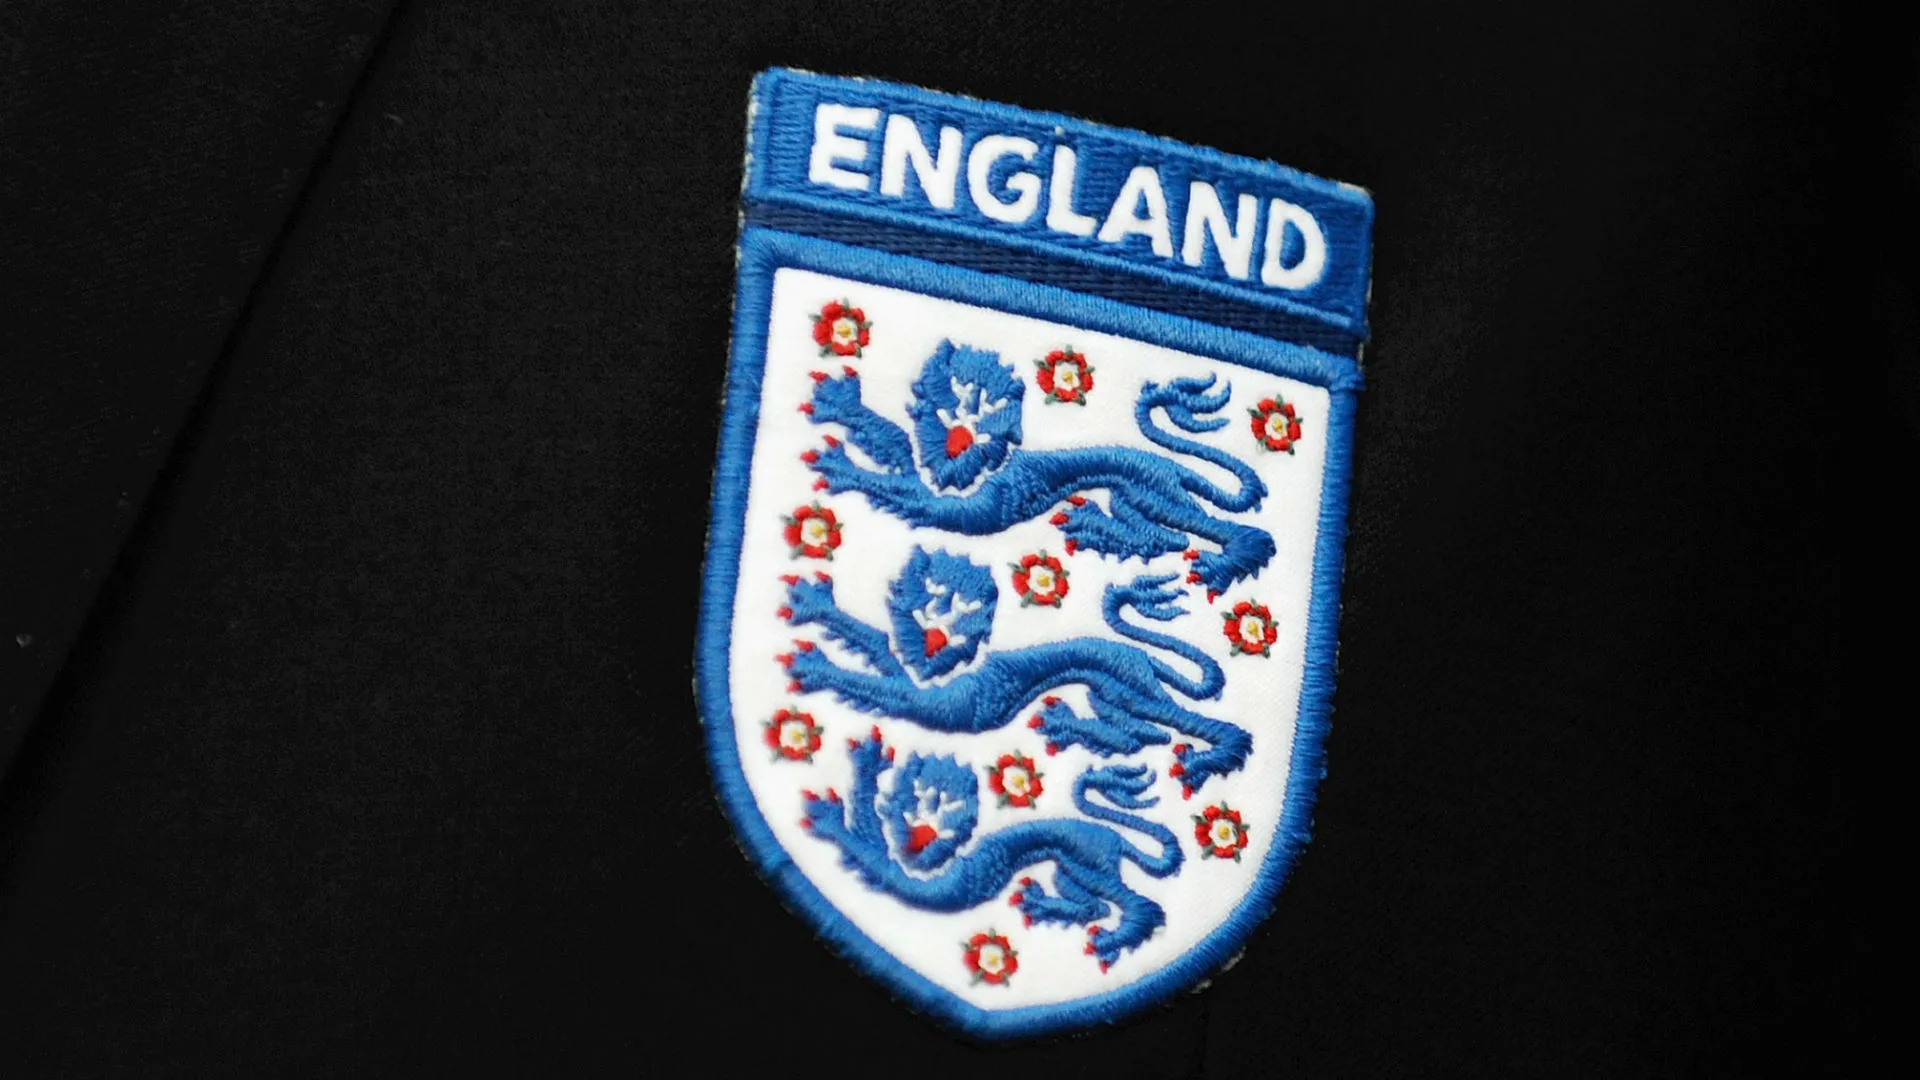 England National Football Team Logo and symbol, meaning, history